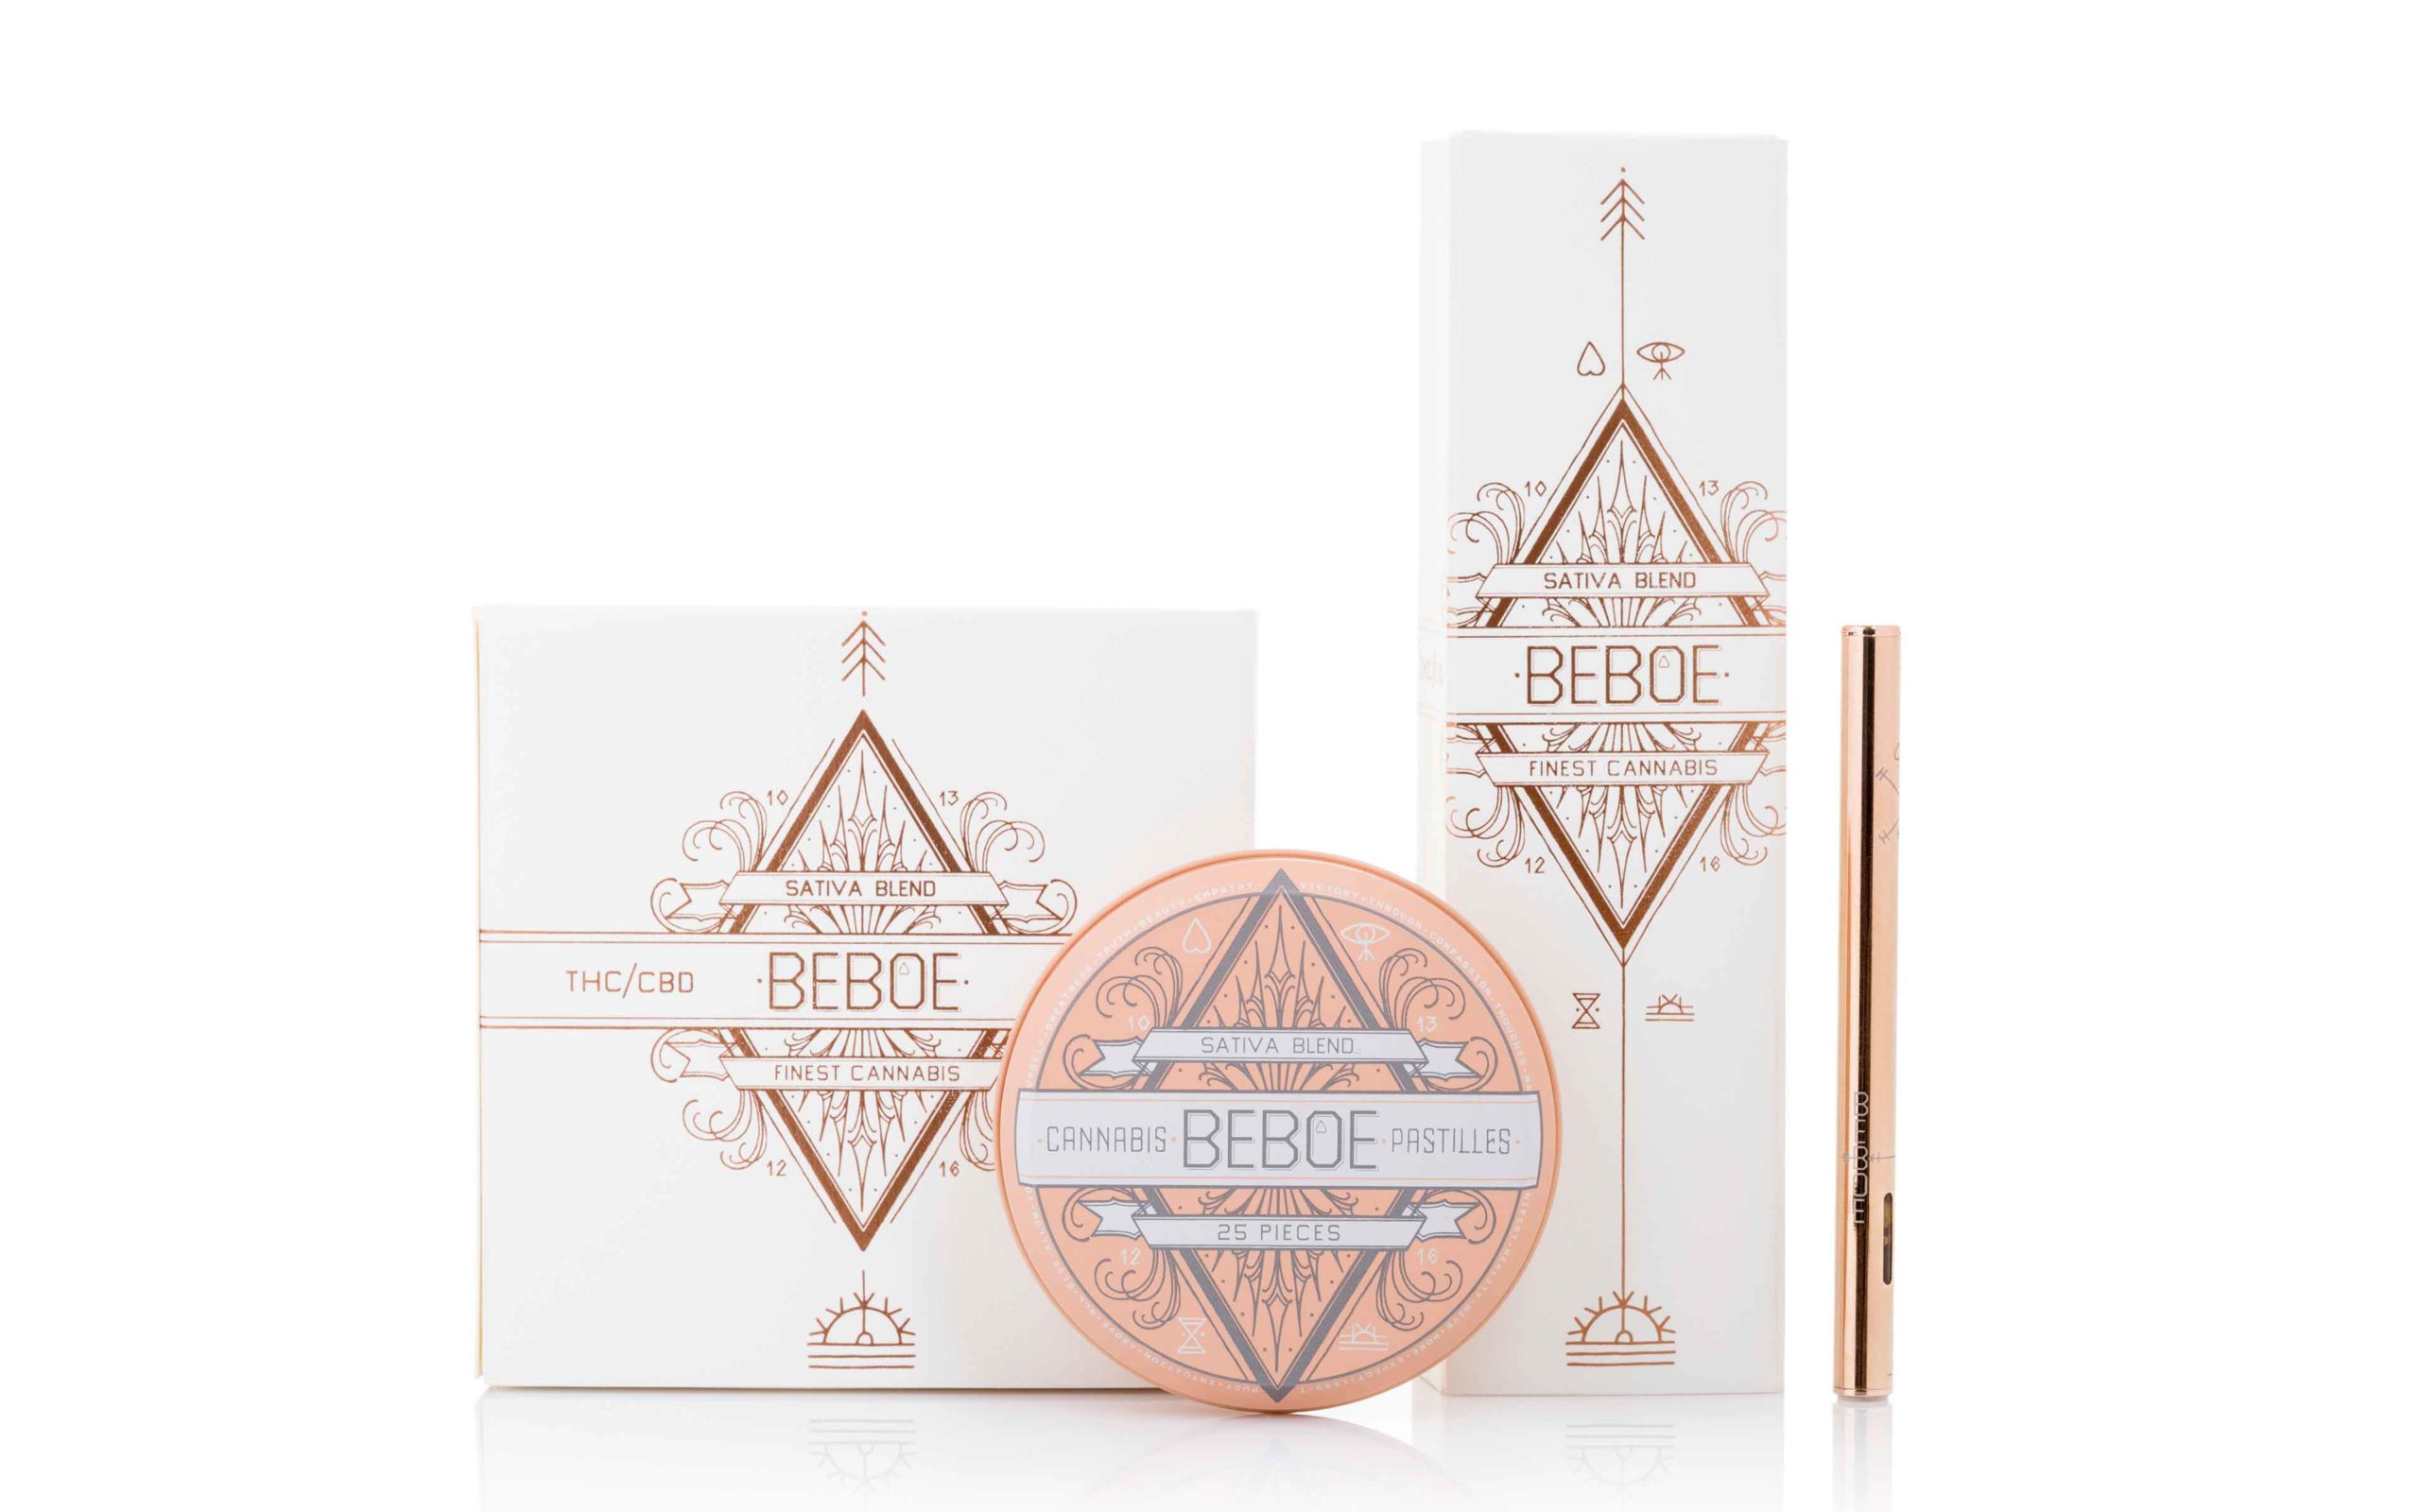 is this luxury cannabis brand the hermes of cbd